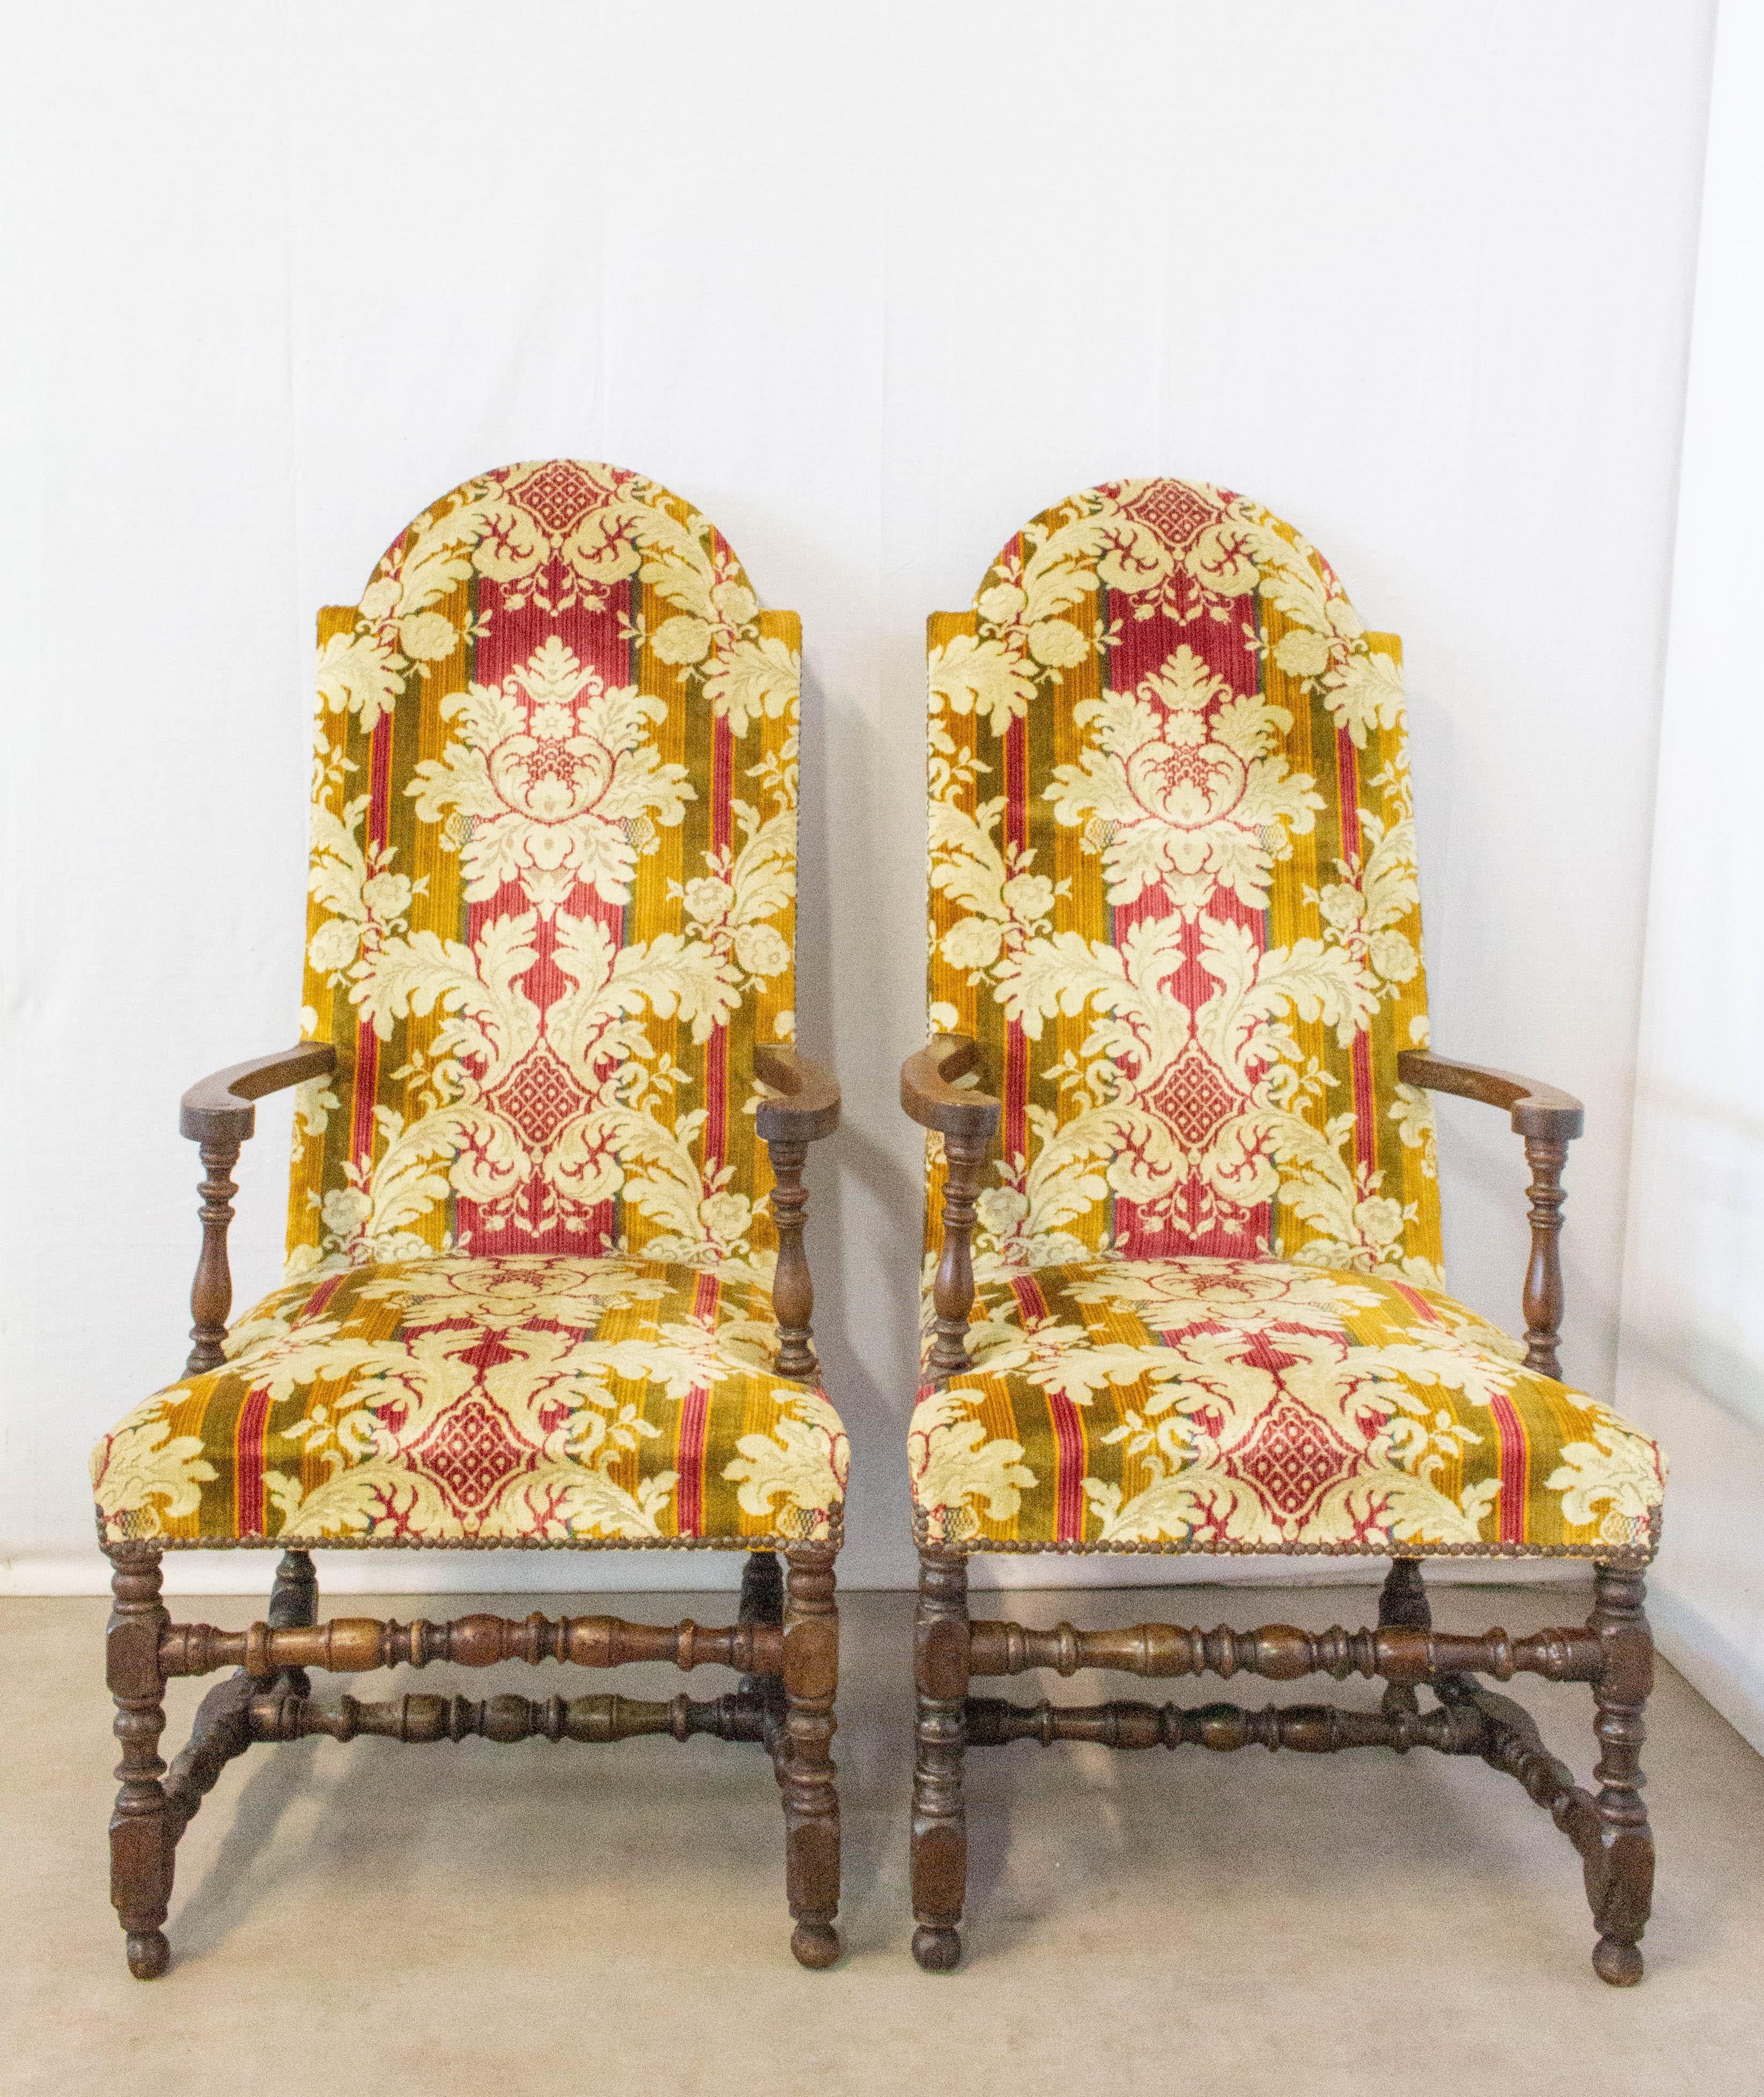 Late 18th century pair of open armchairs French Louis XIII
Renaissance Revival
Good antique condition wood frames are solid and sound, covers easily changed to suit your interior, upholstery is good and may need a couple of simple minor